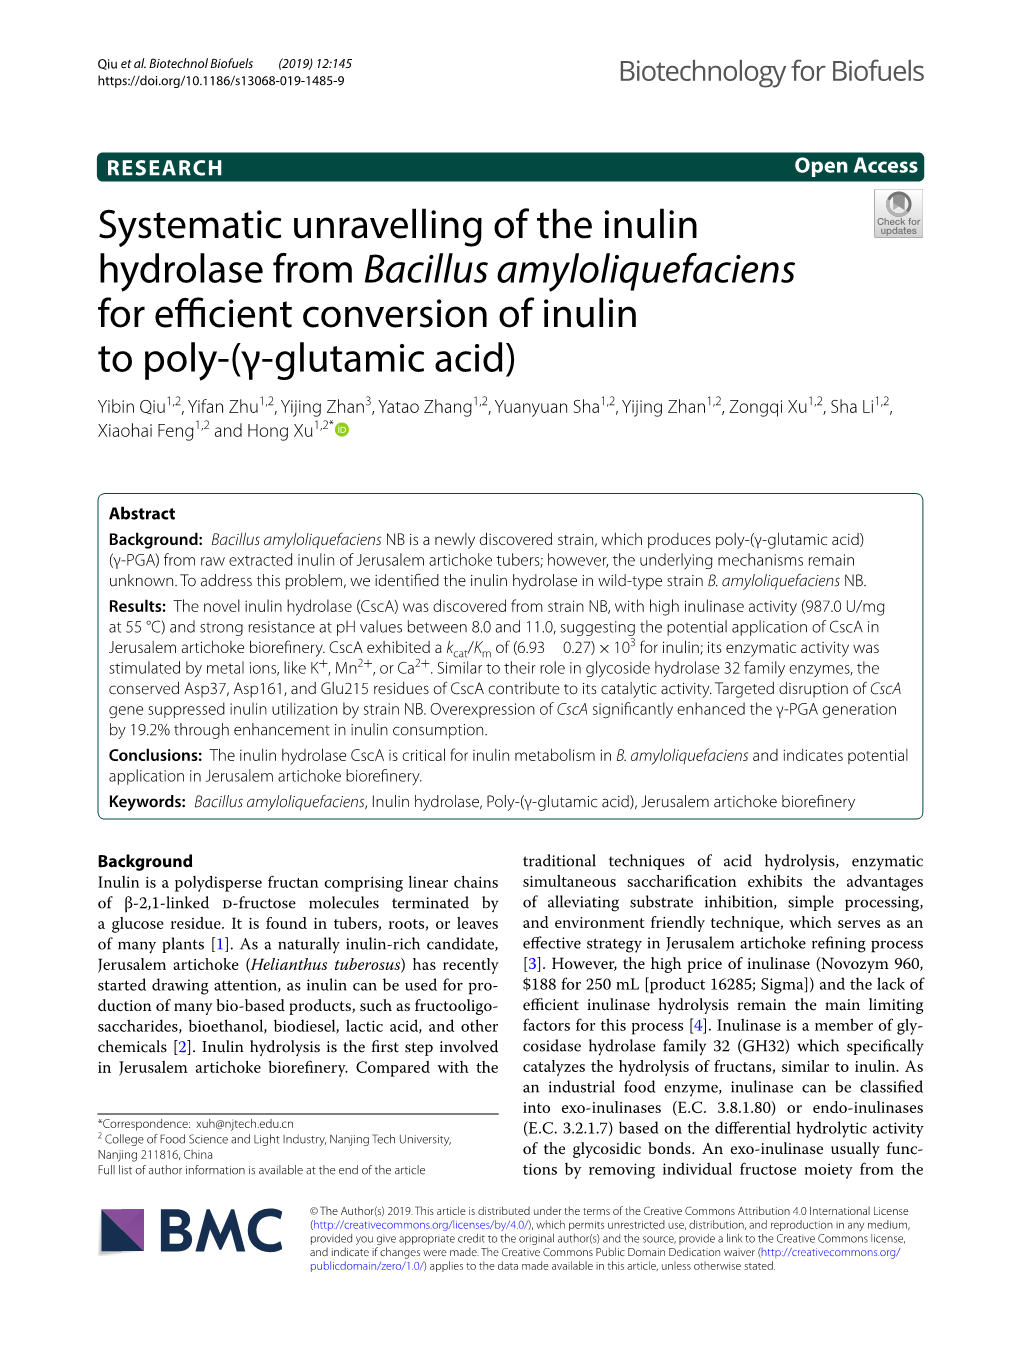 Systematic Unravelling of the Inulin Hydrolase from Bacillus